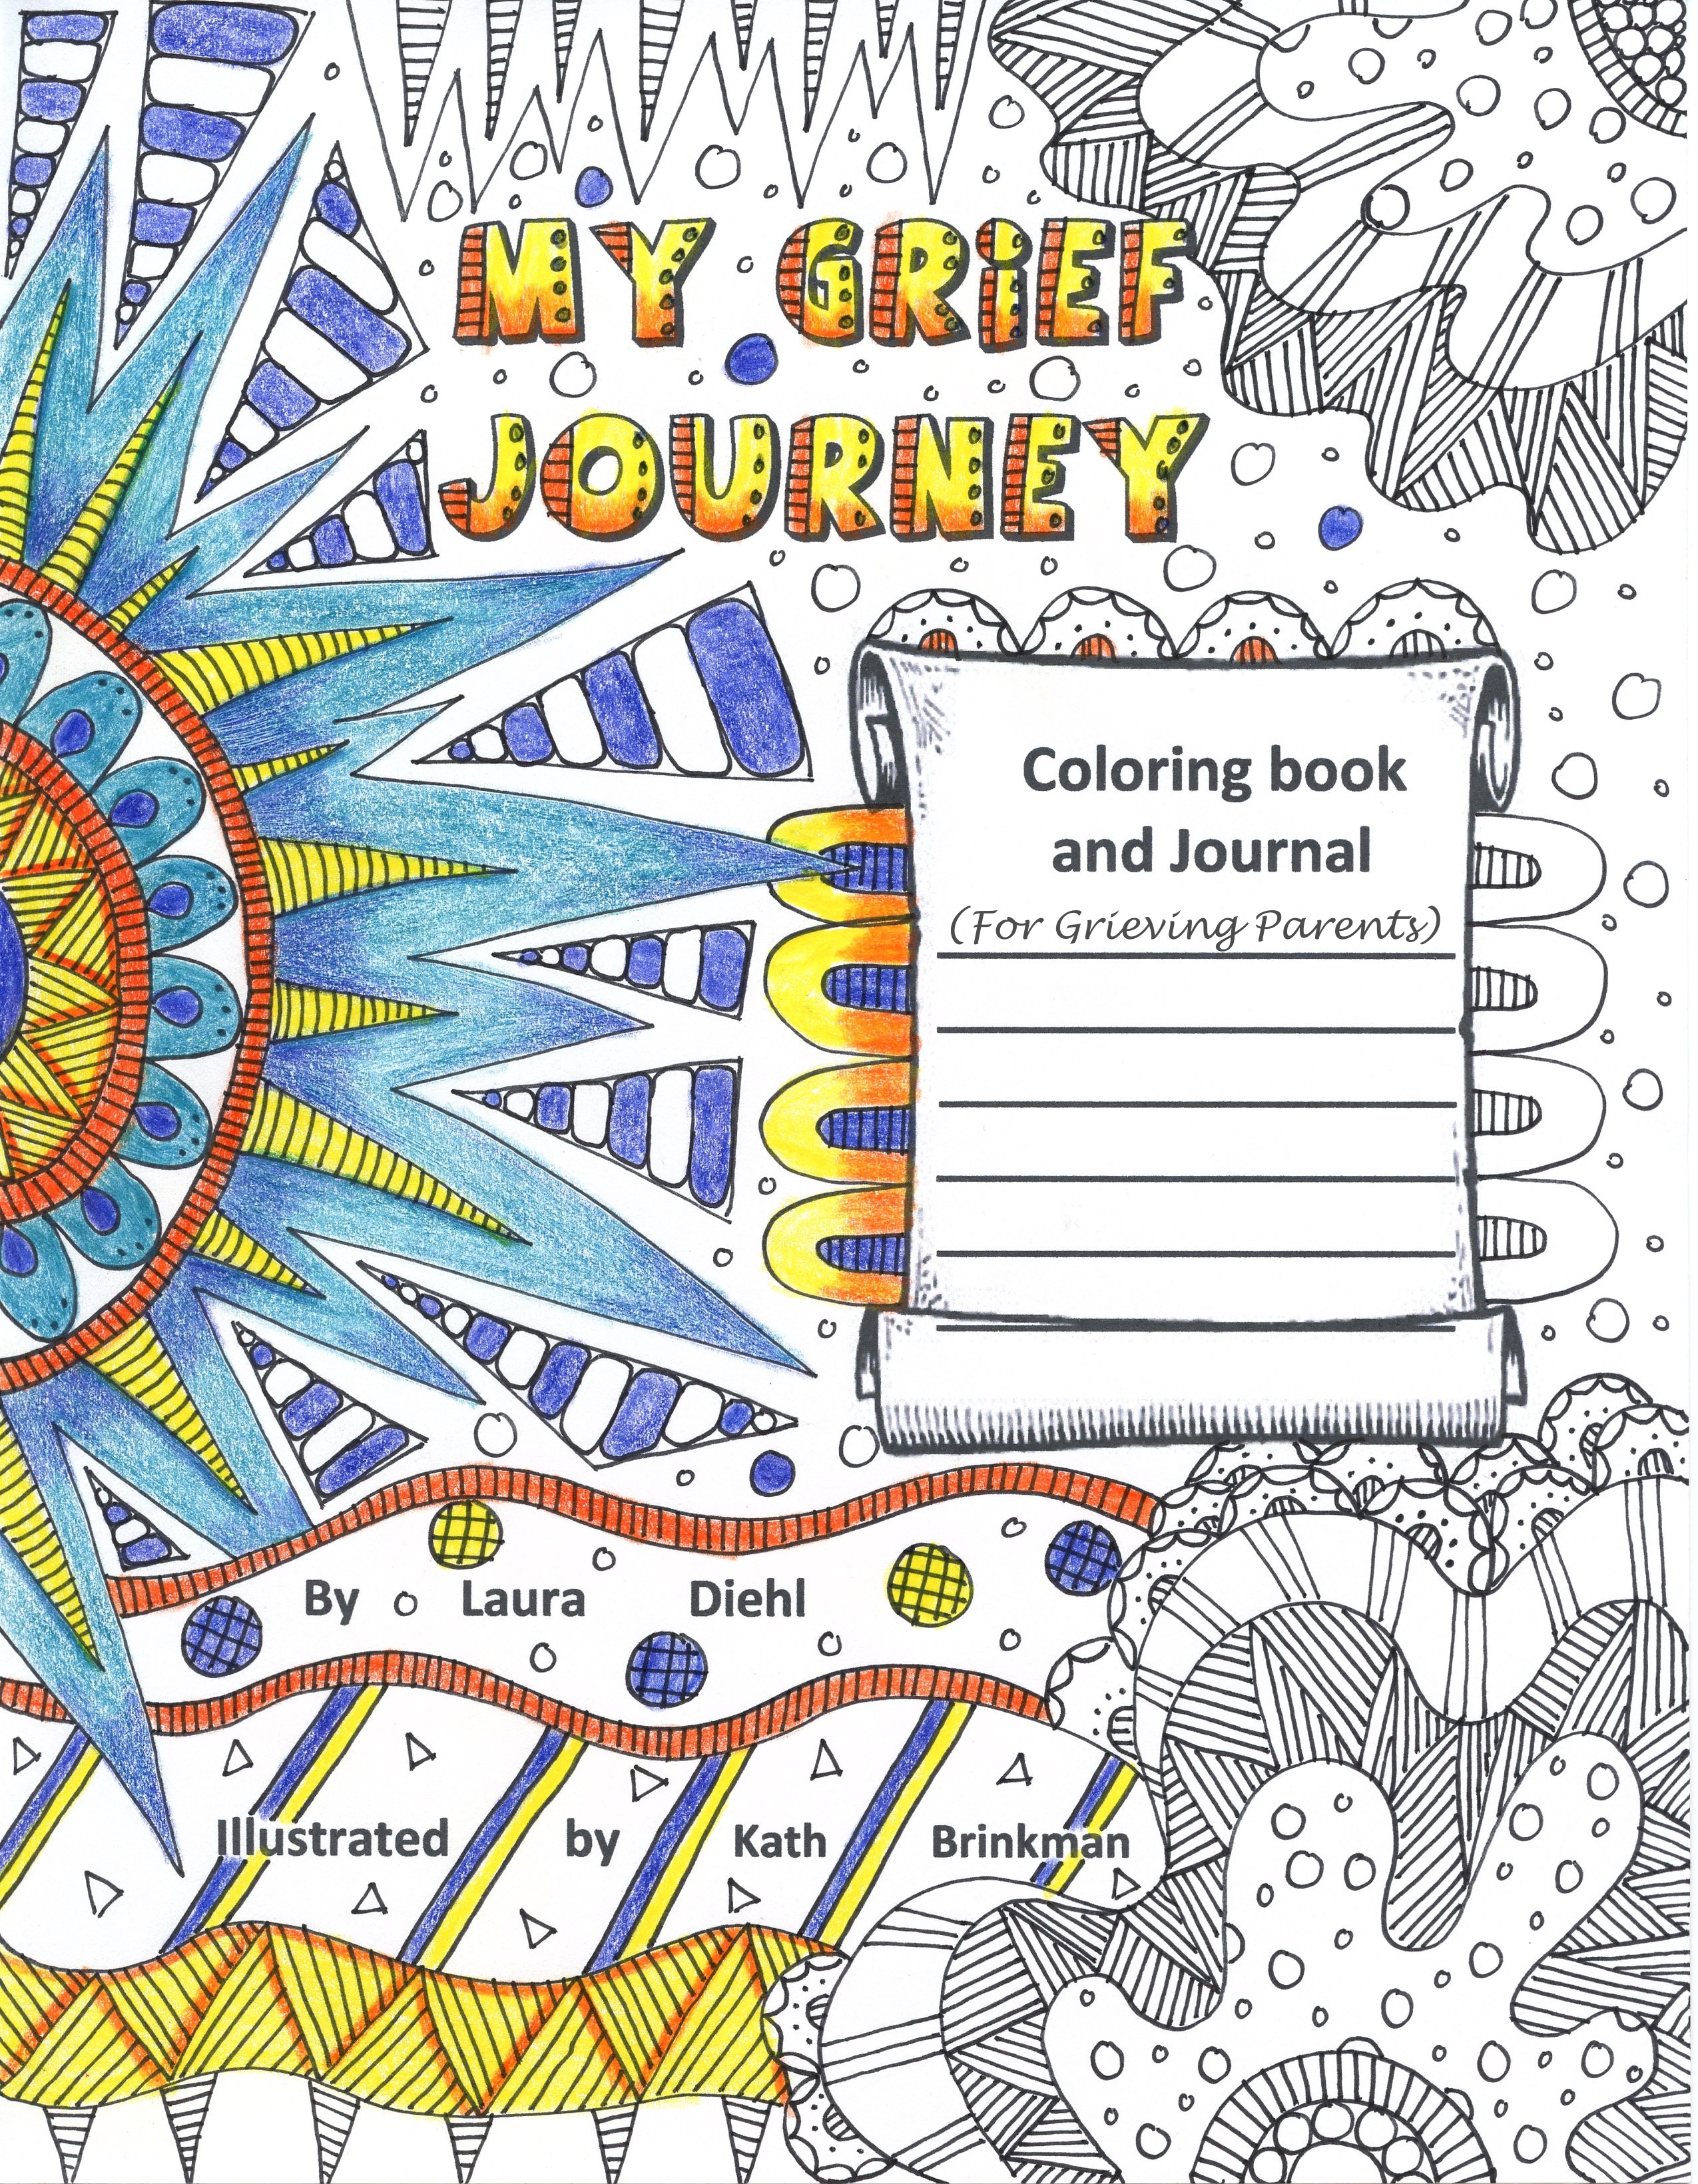 My Grief Journey: Coloring Book and Journal for Grieving Parents